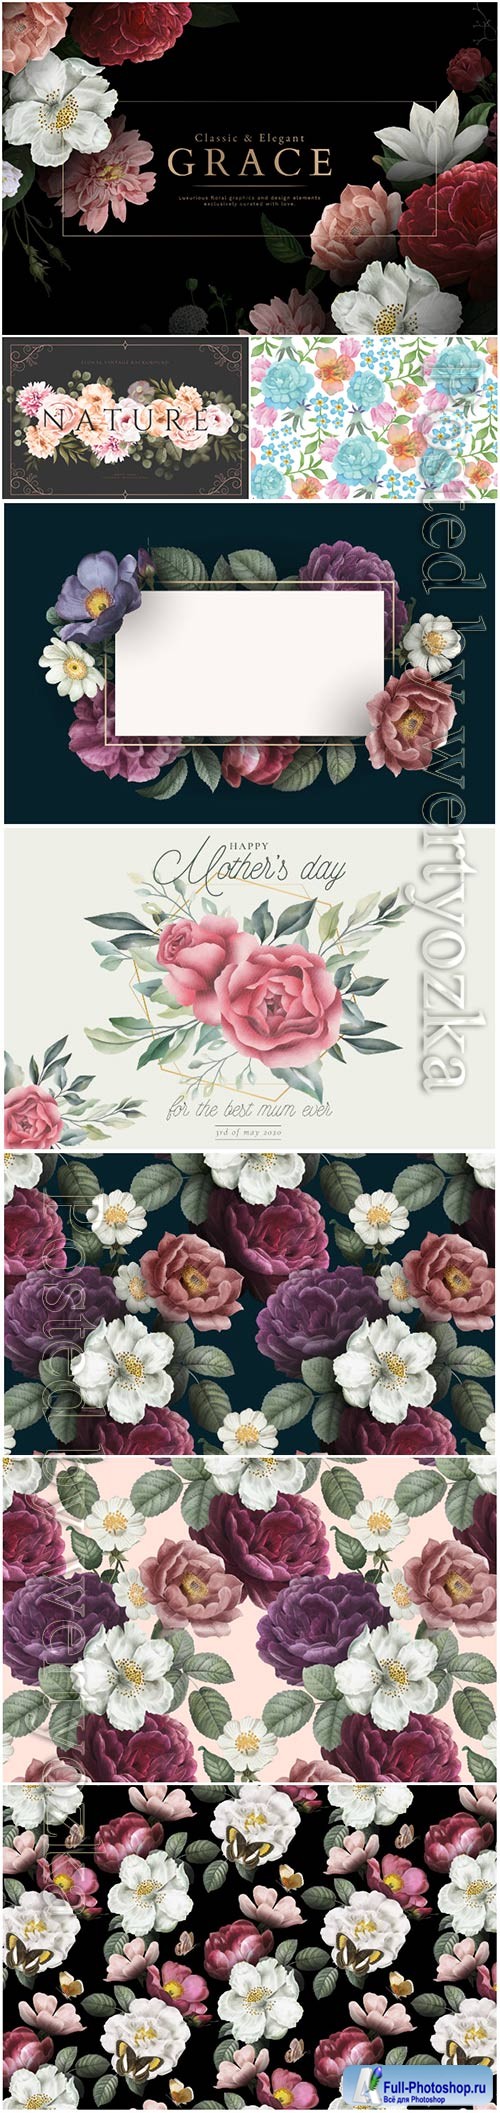 Beautiful vector backgrounds with roses and flowers